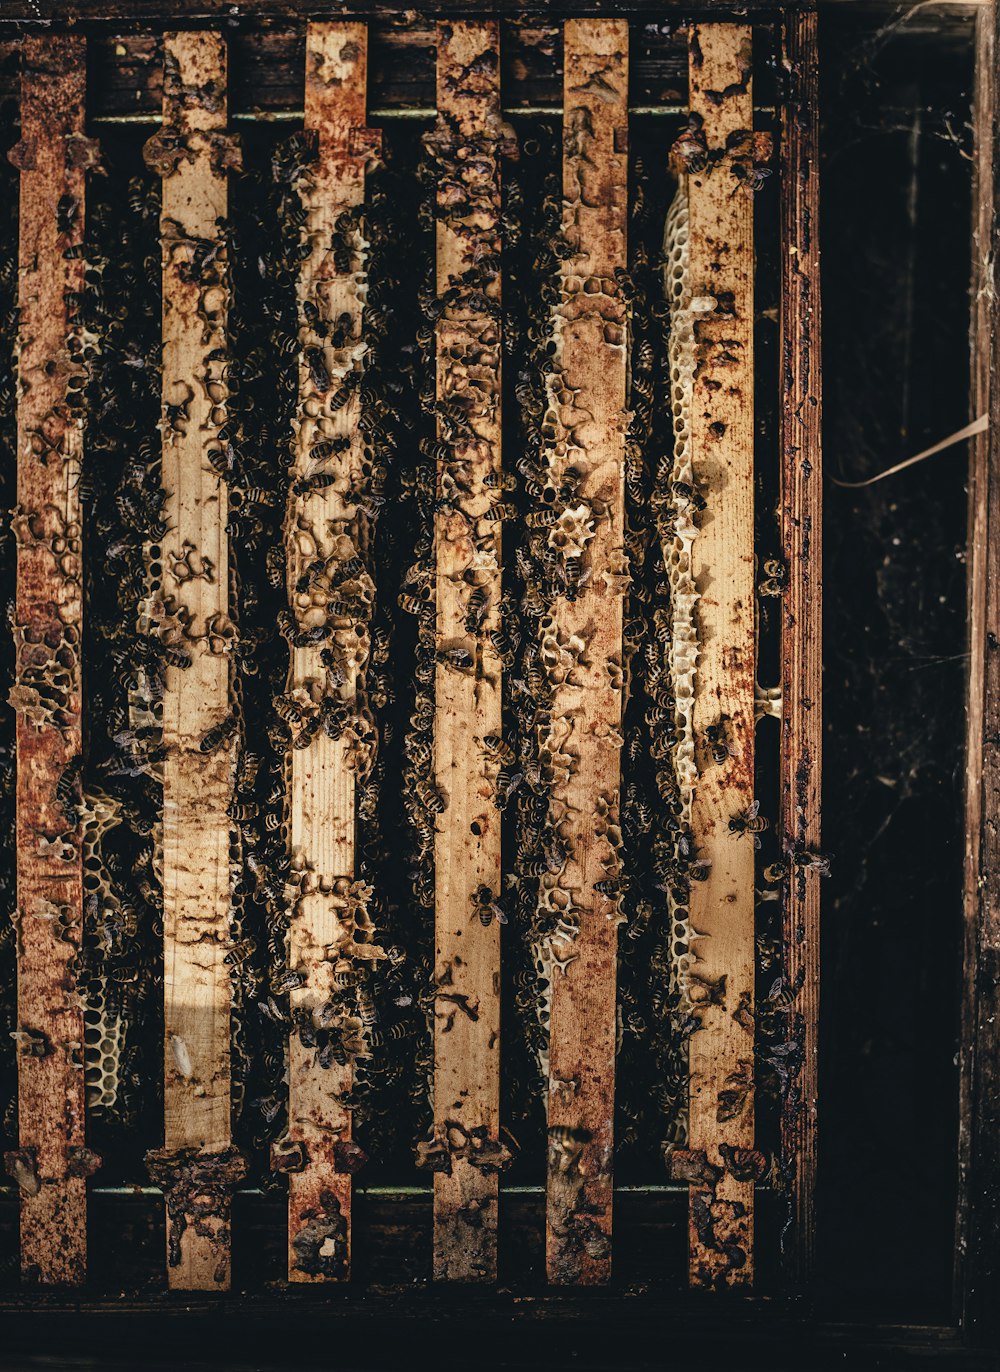 Bees inside the wooden cage